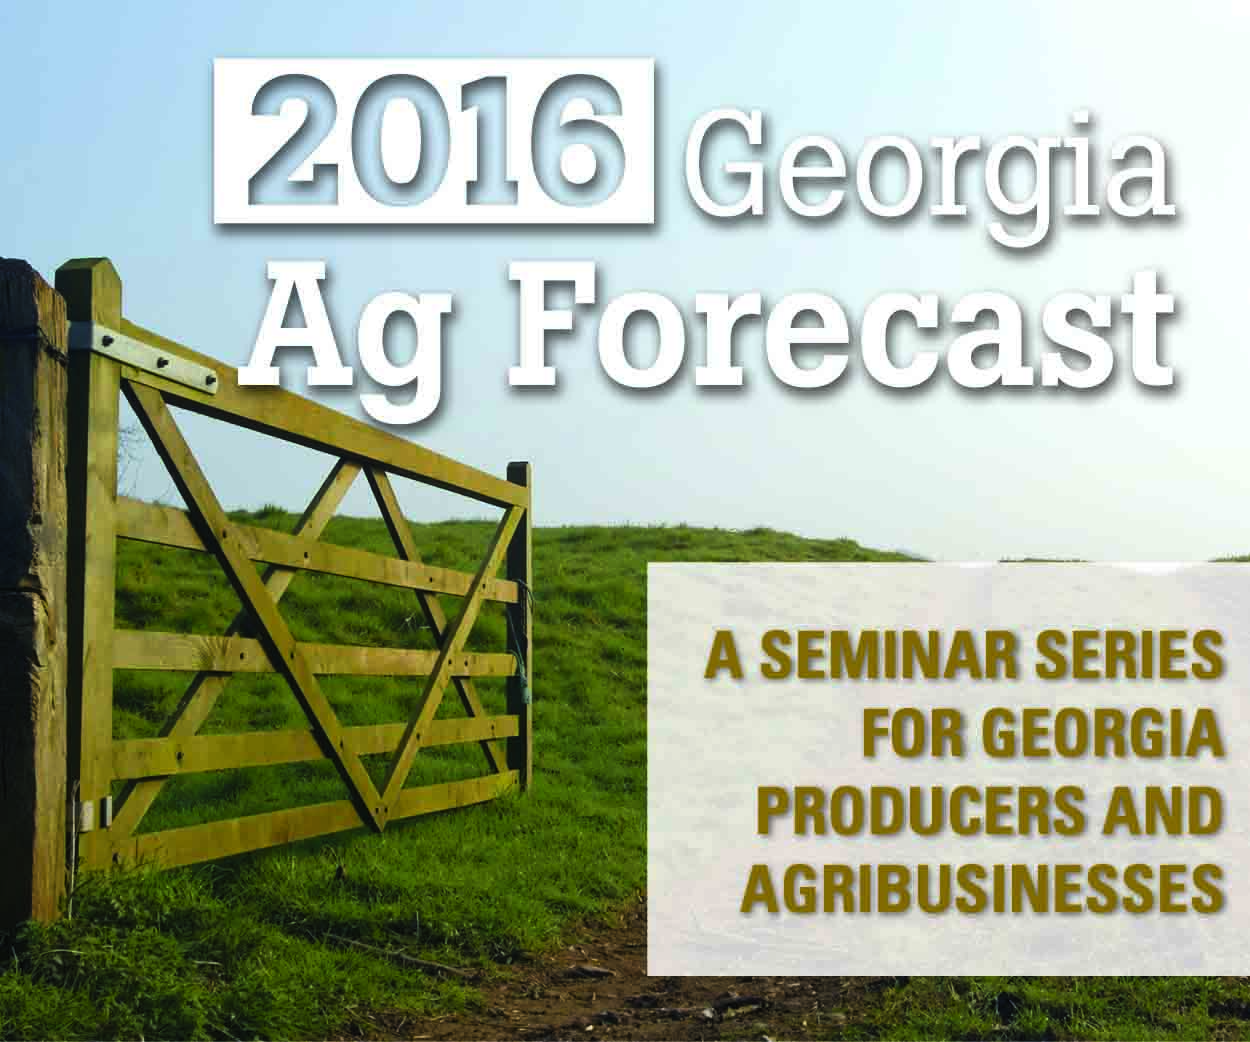 The 2016 Ag Forecast sessions will be held on Thursday, Jan. 21, at the Carroll County Ag Center in Carrollton; Friday, Jan. 22, at Unicoi State Park in Cleveland; Monday, Jan. 25, at the Cloud Livestock Facility in Bainbridge; Tuesday, Jan. 26, at the UGA Tifton Campus Conference Center in Tifton; Wednesday, Jan. 27, at the Blueberry Warehouse in Alma; and Friday, Jan. 29, at the Georgia Farm Bureau Building in Macon.